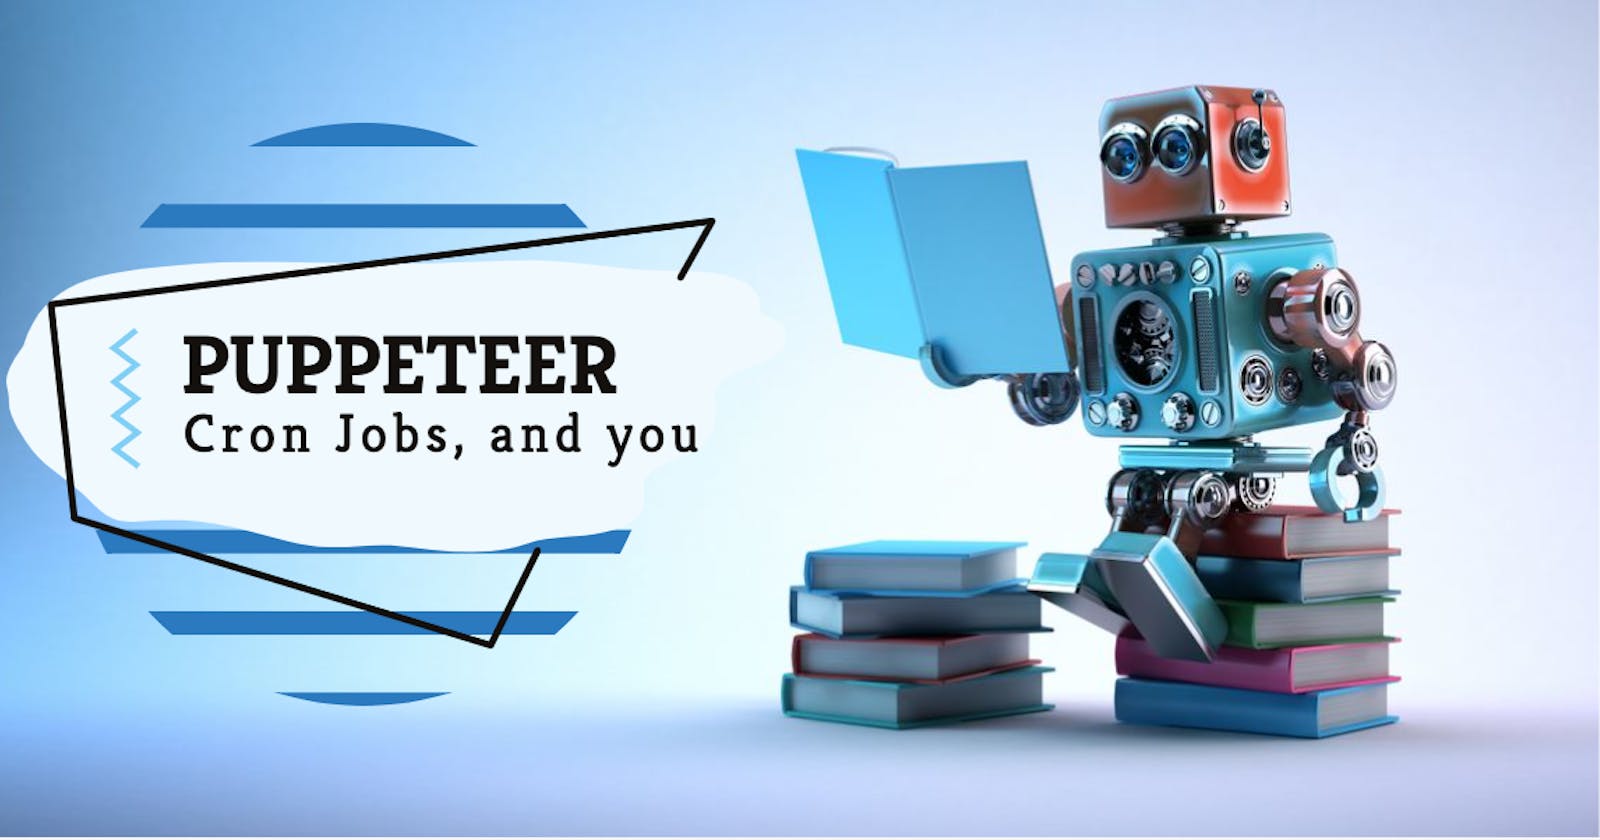 Puppeteer, Cron Jobs, and You